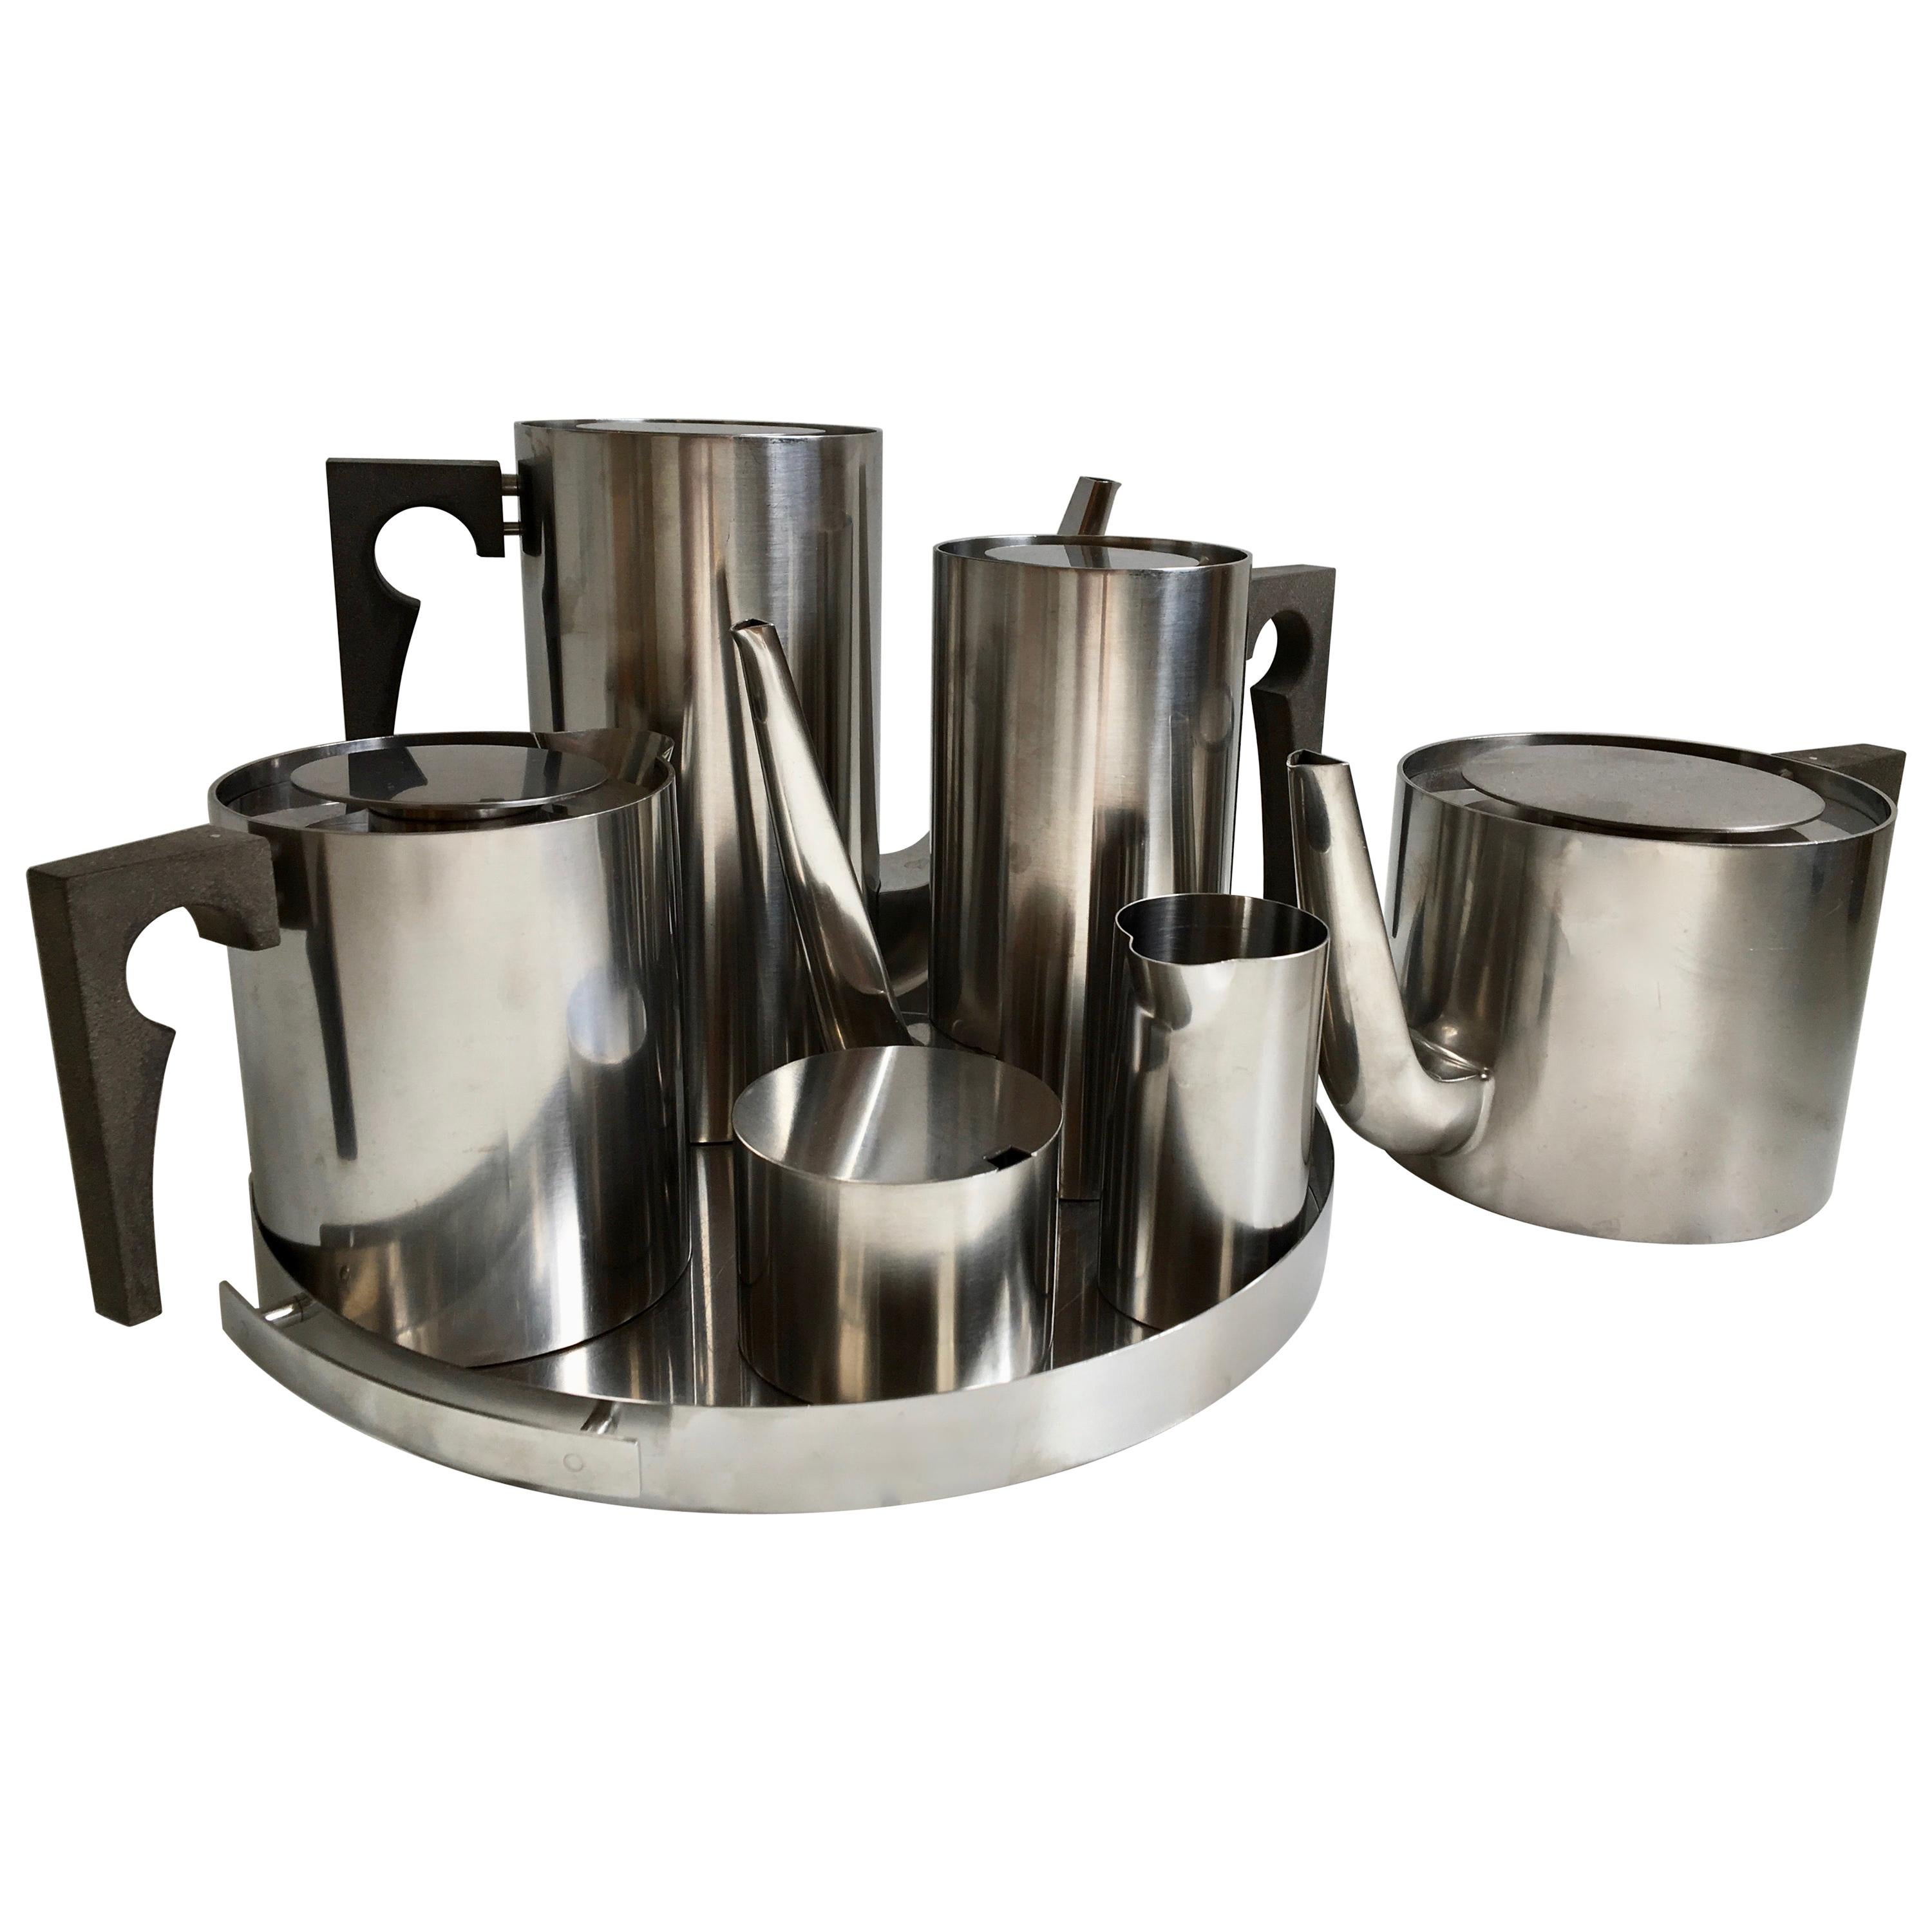 Midcentury Danish Stainless Steel Tea or Coffee Set by Arne Jacobsen for Stelton For Sale